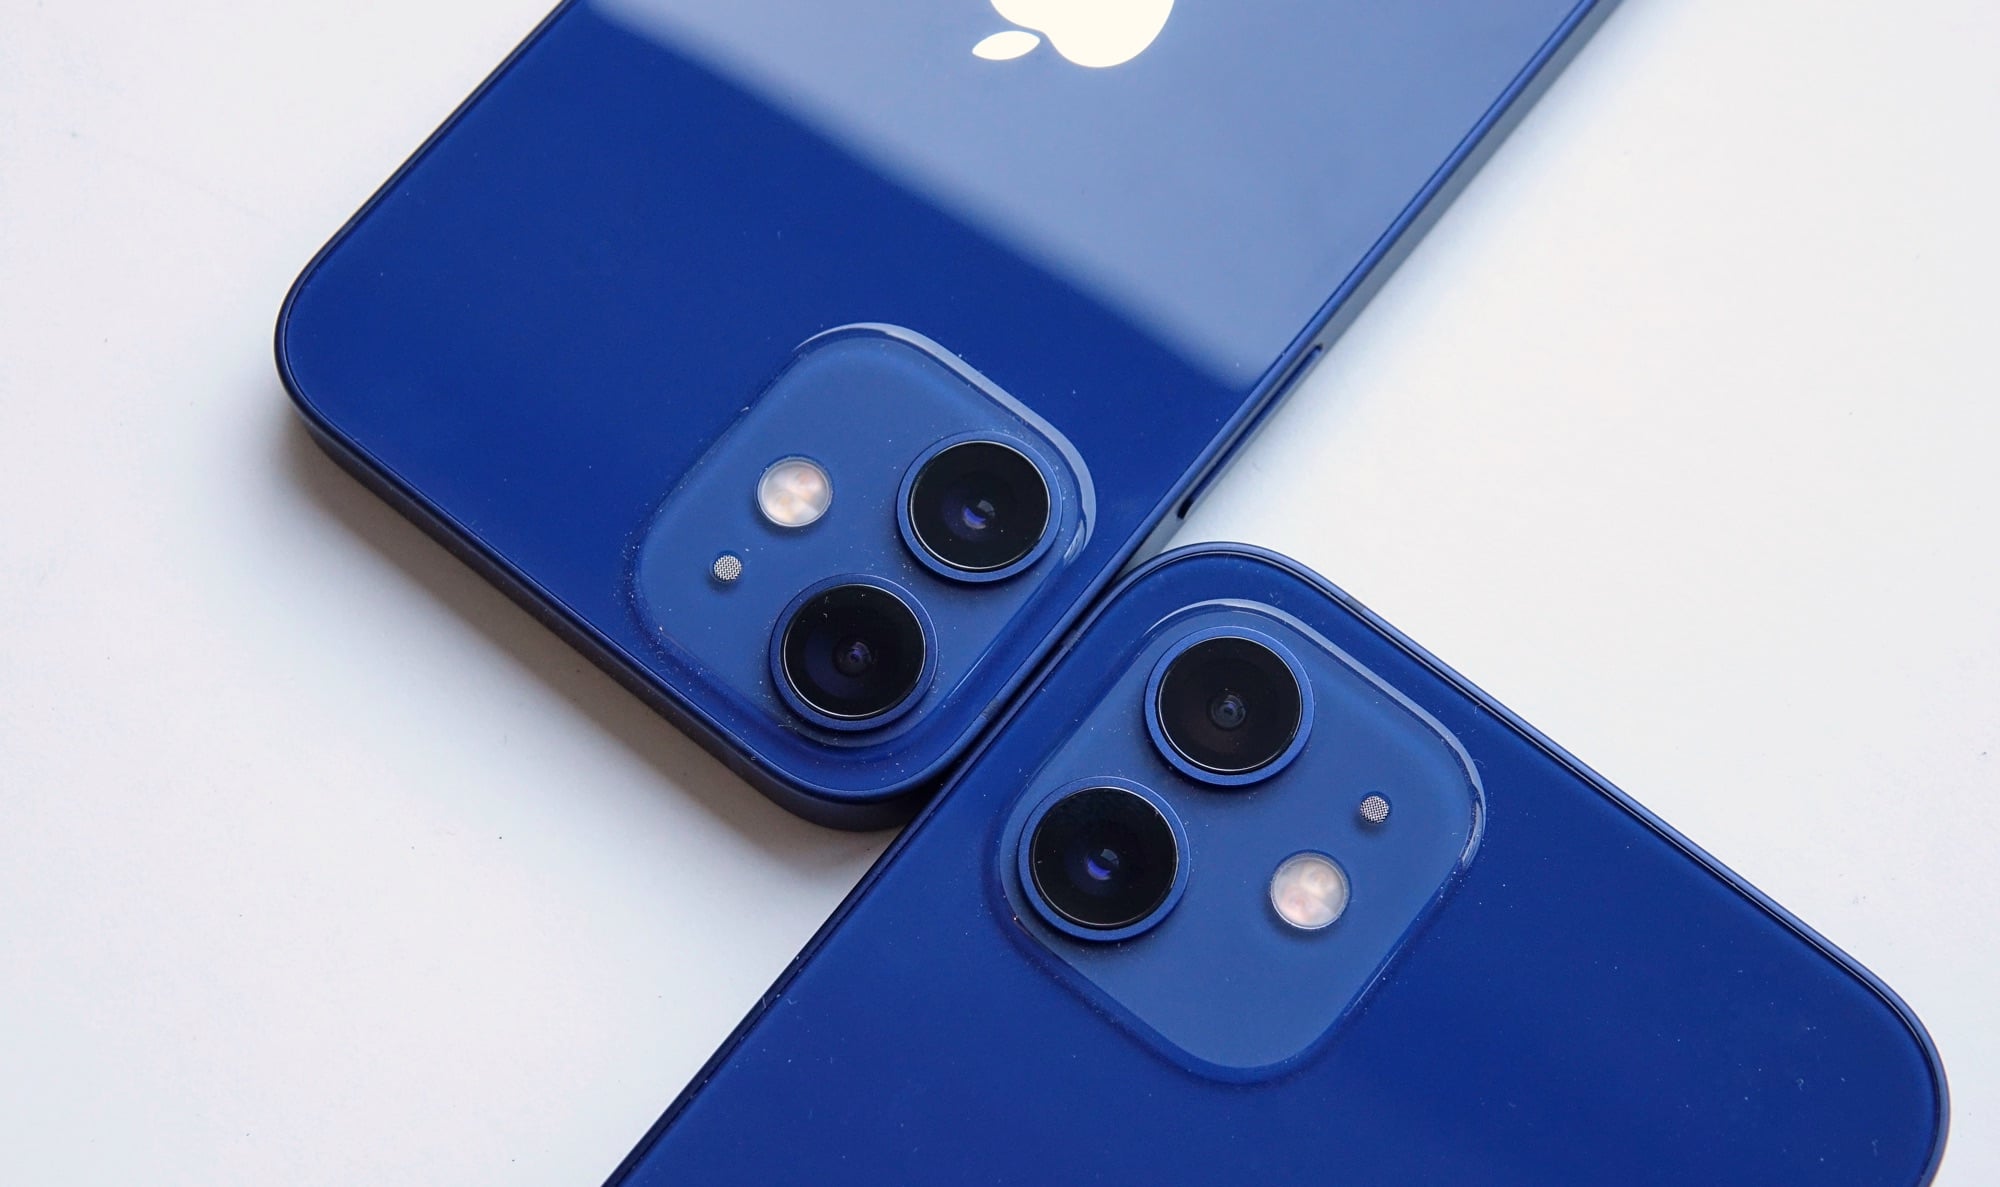 iPhone 12 Mini camera (left) next to the iPhone 12 camera (right)